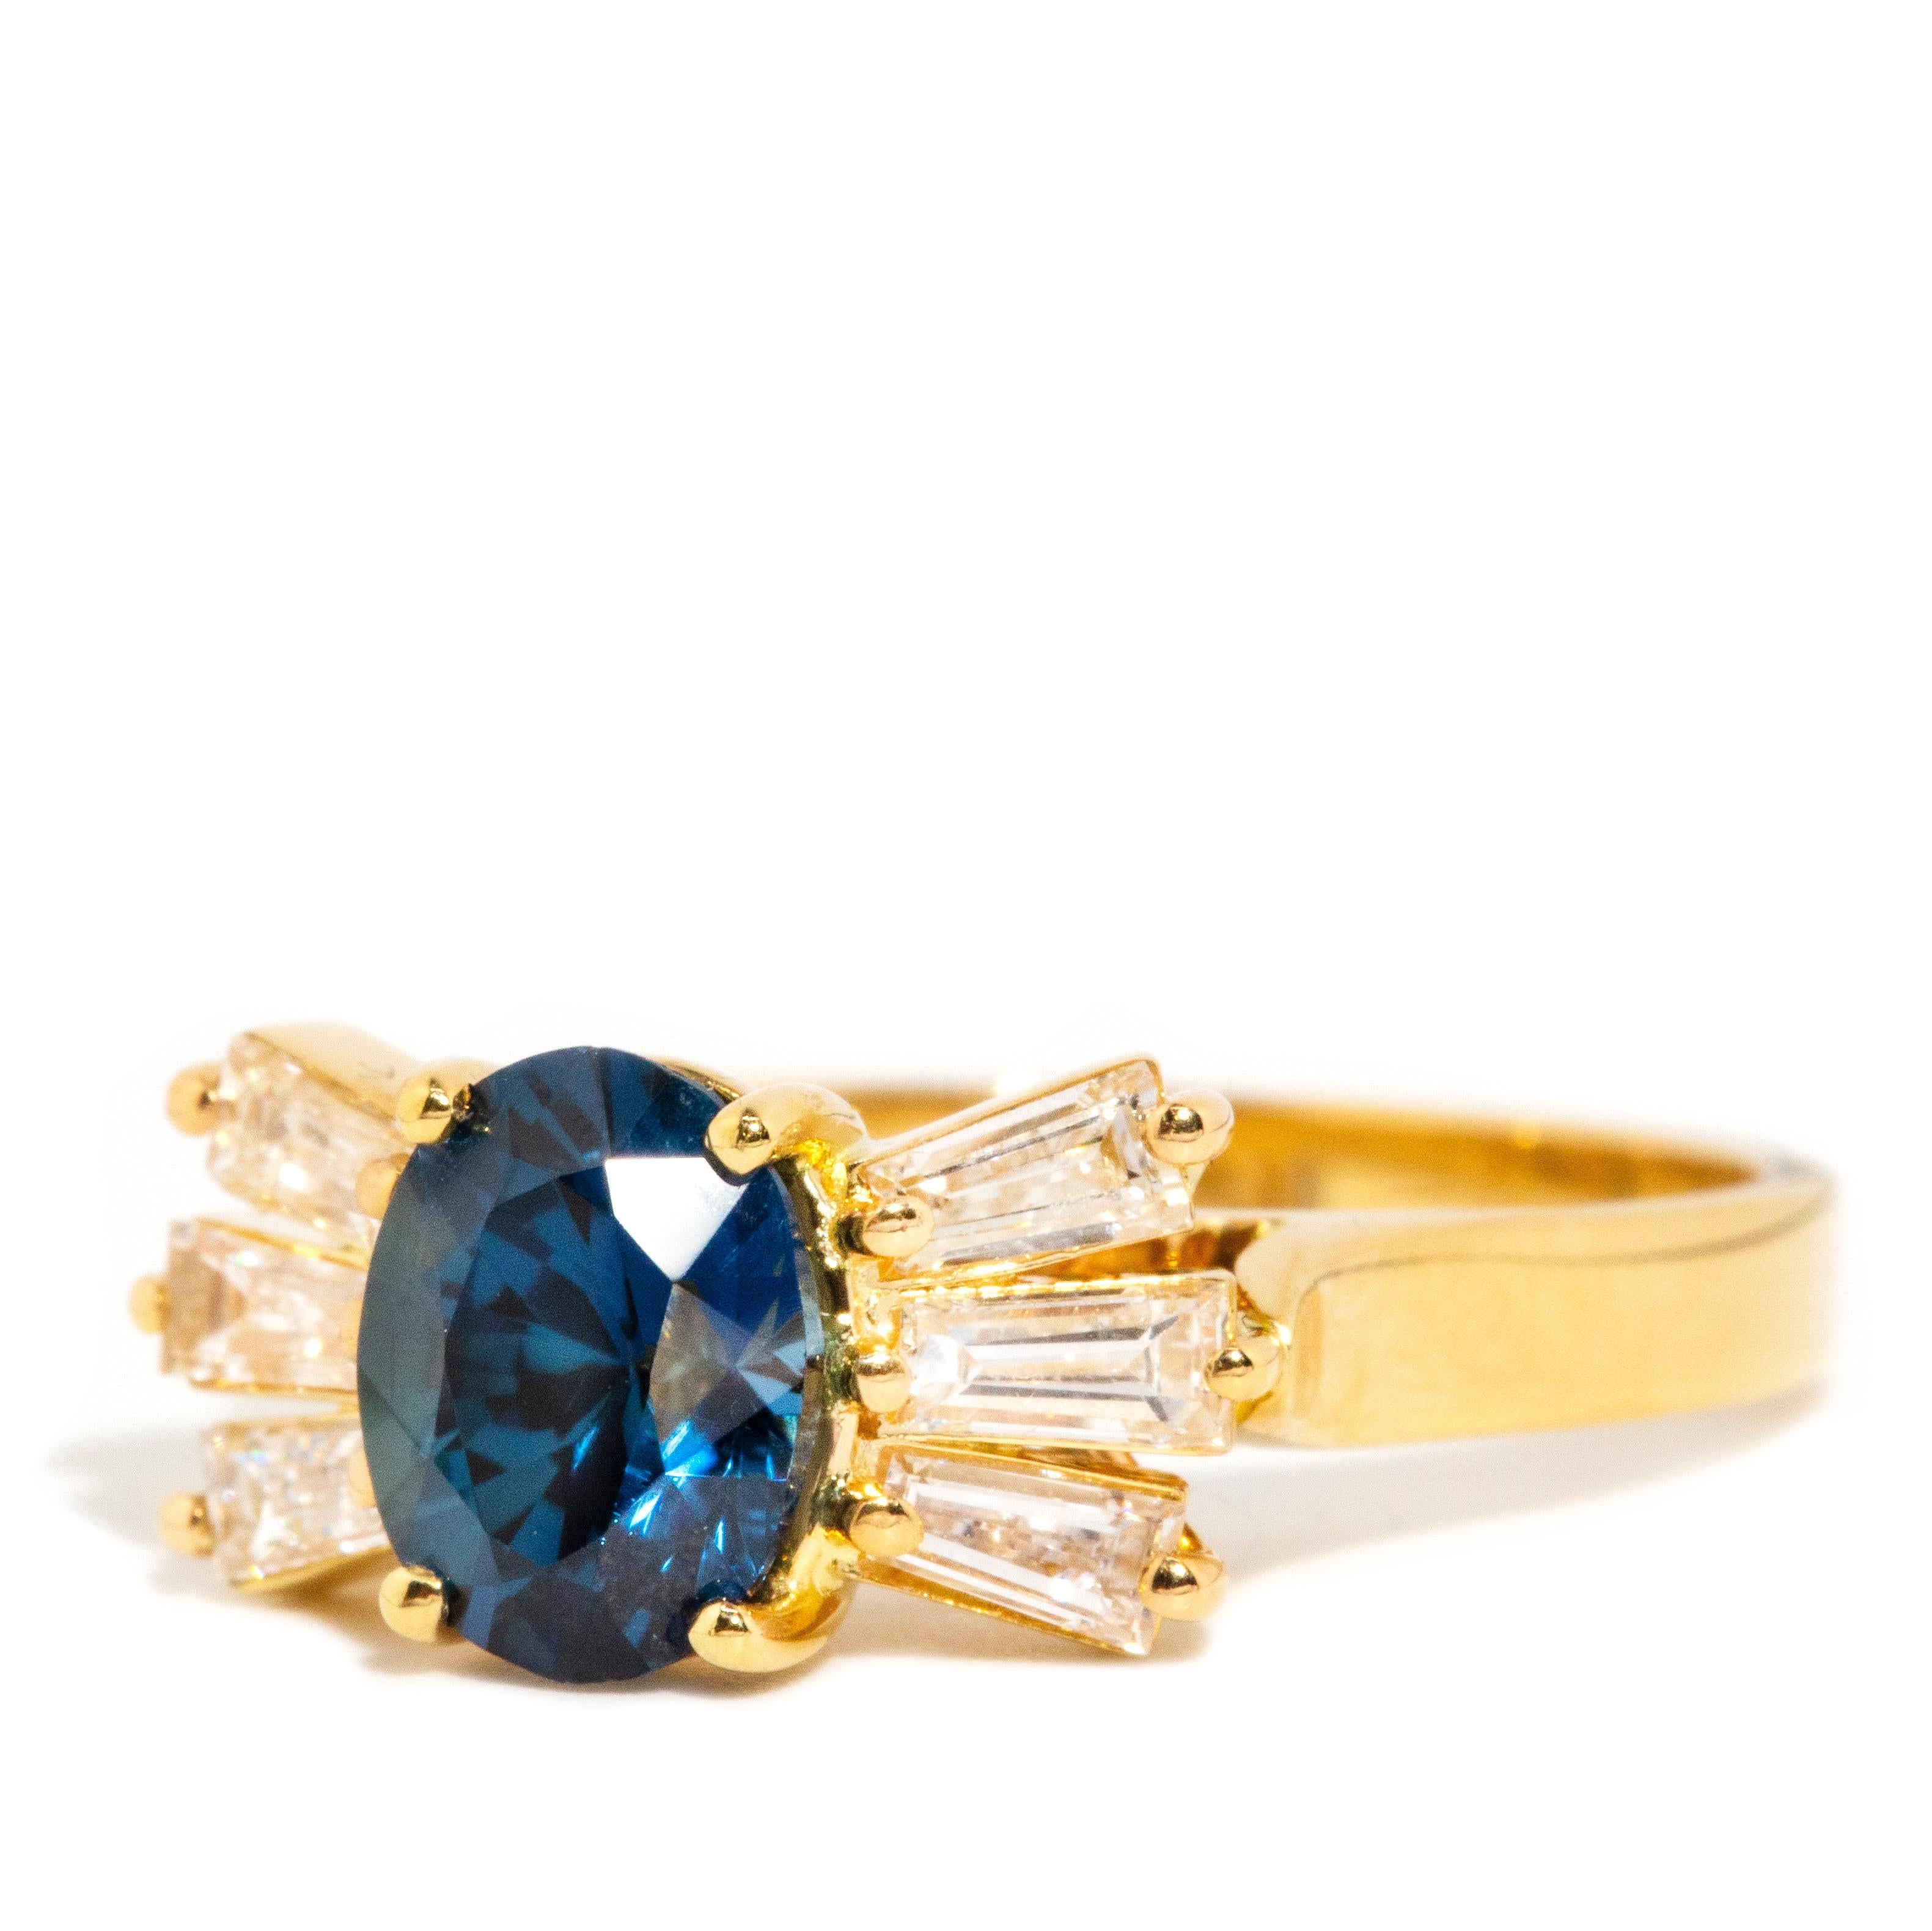 Oval Cut Vintage Circa 1980s 1.78 Carat Sapphire & Baguette Diamond Ring 18ct Yellow Gold For Sale